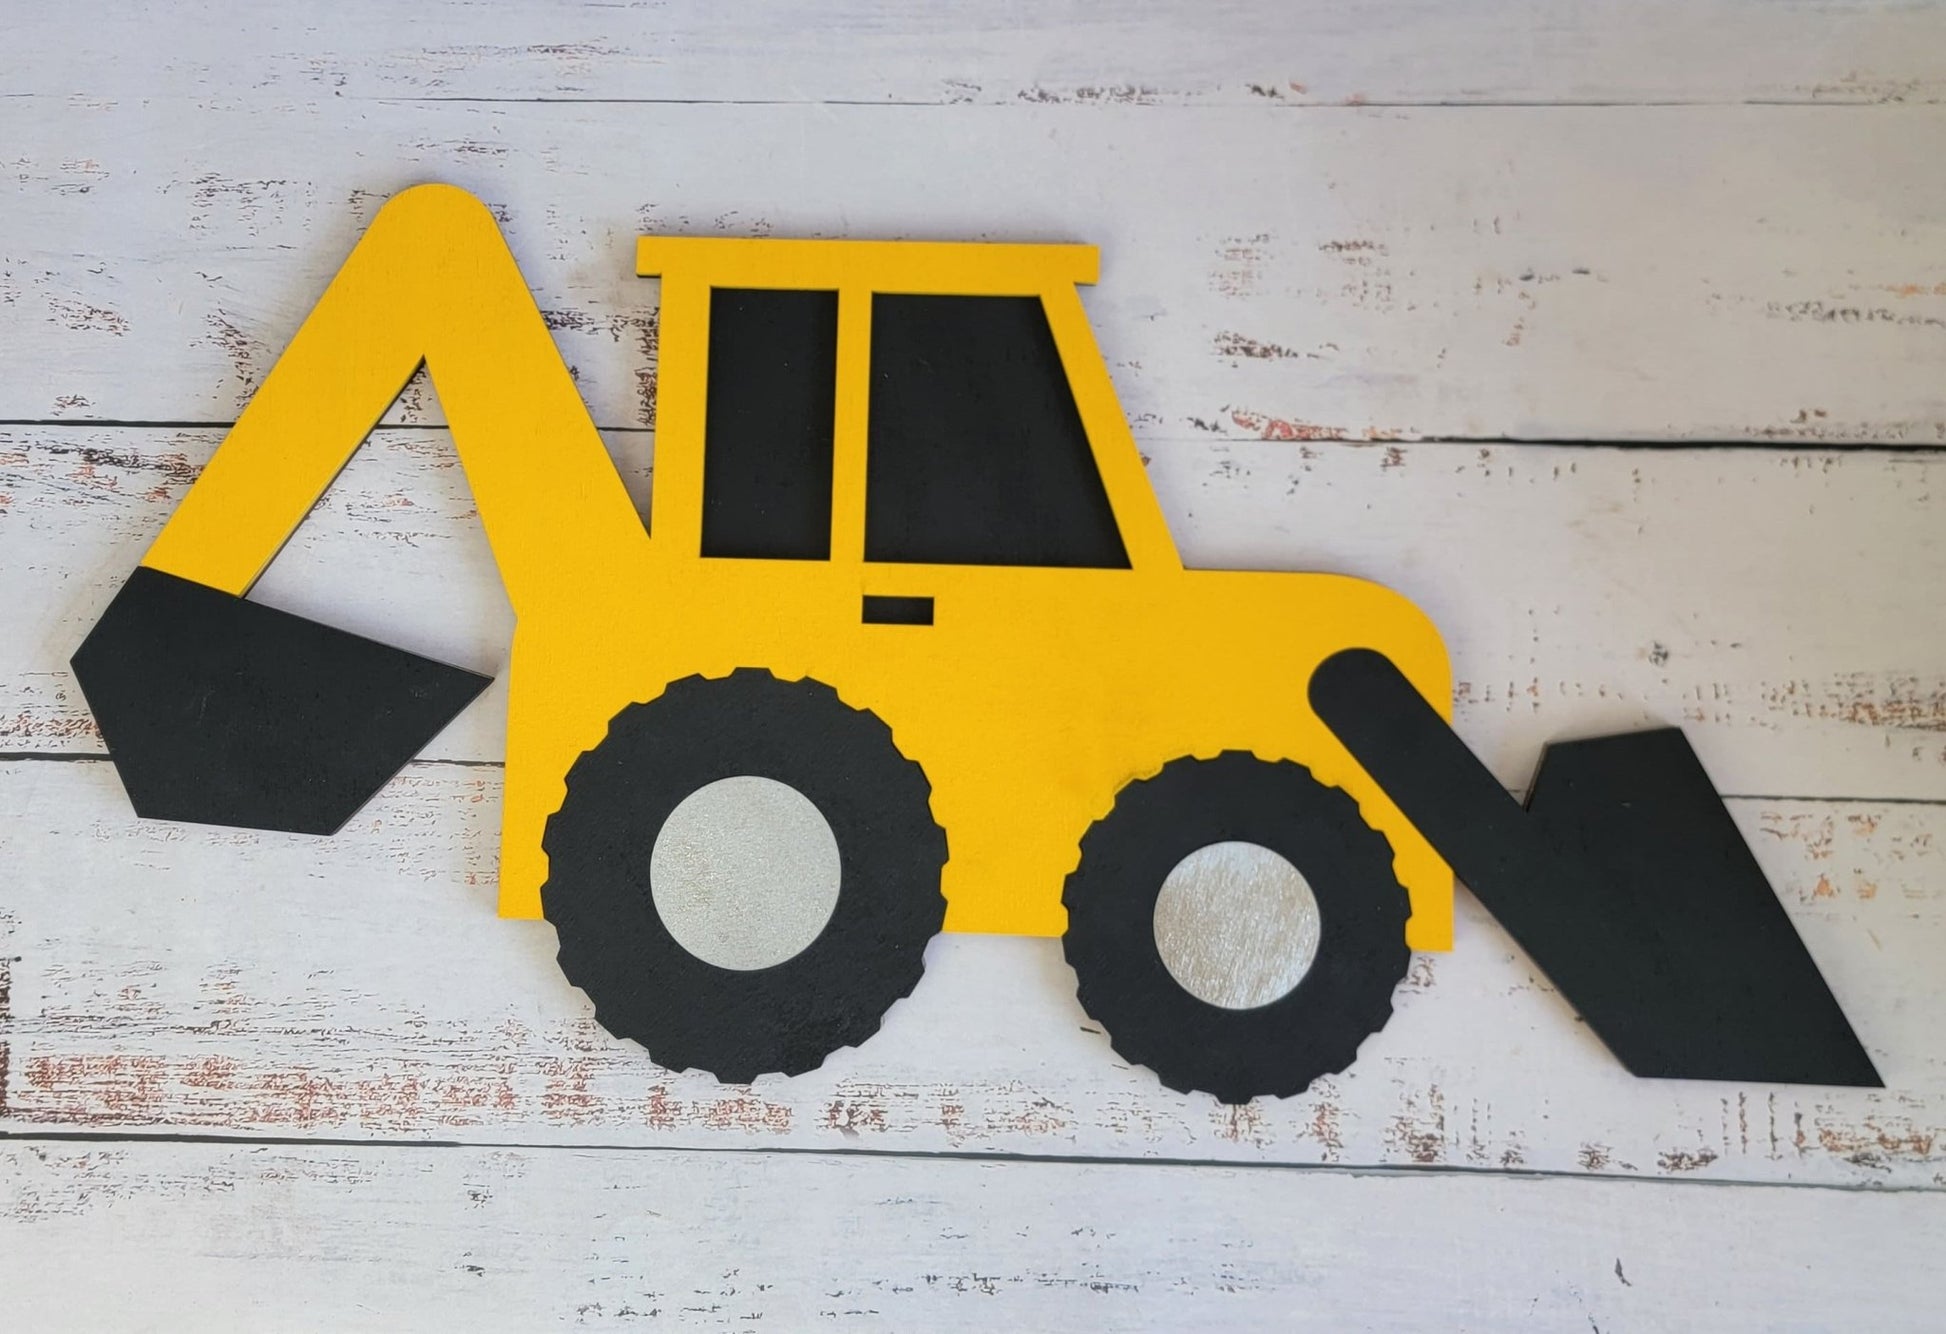 Wood Construction Wall Accessory, Construction Nursery Decor, Construction Kid Room Decor, Construction Party decor, Mixing Truck wall decor - EverLee Creations